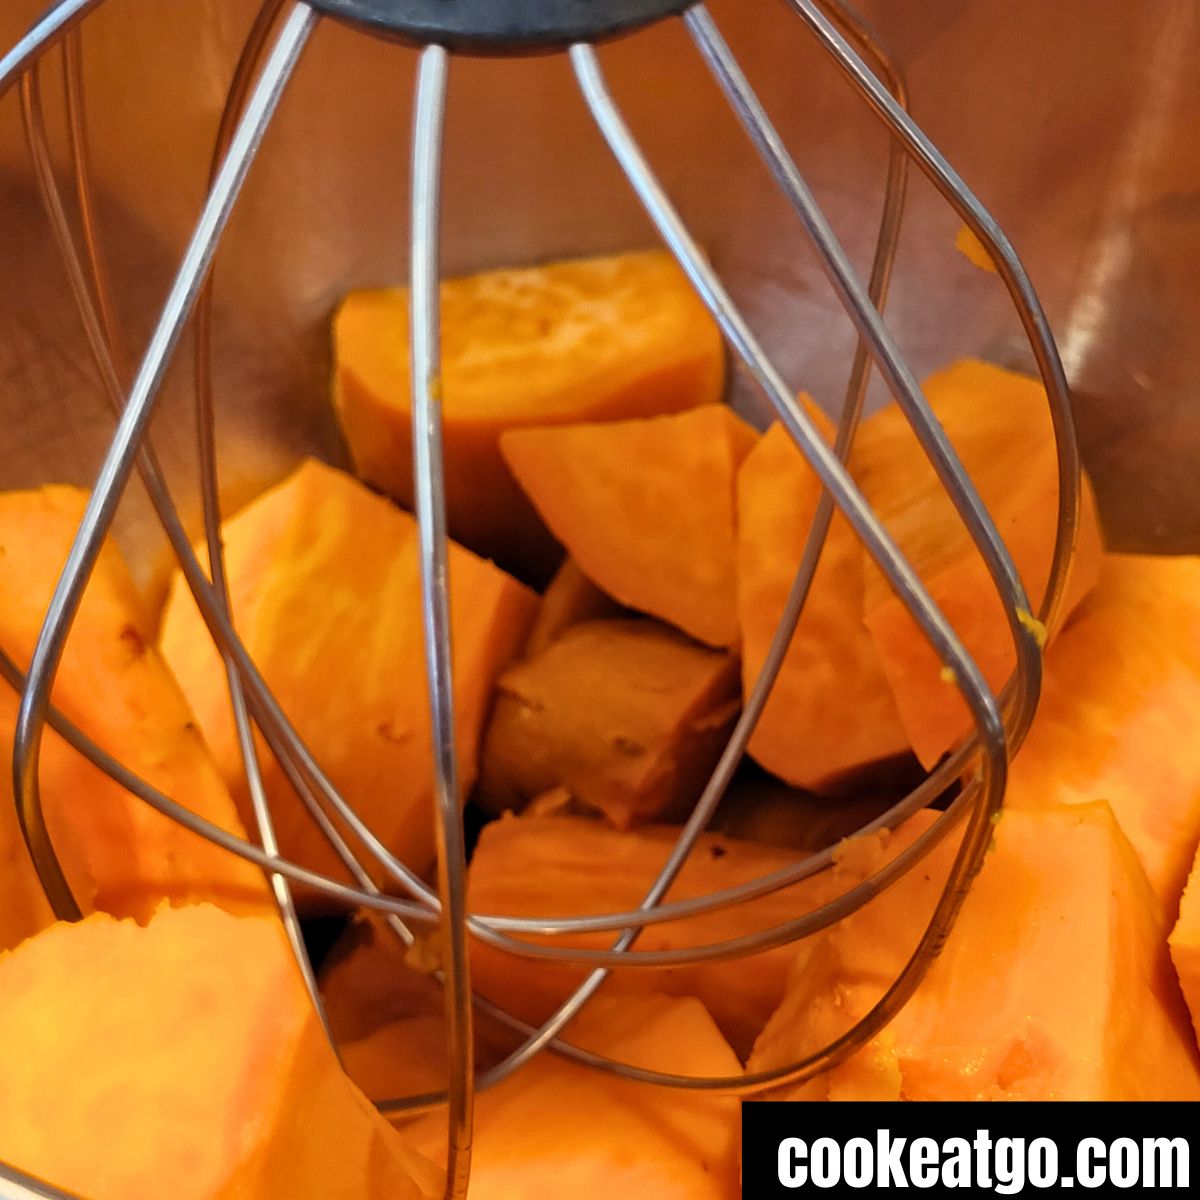 Cubed Sweet Potatoes In Mixer Before Mashing